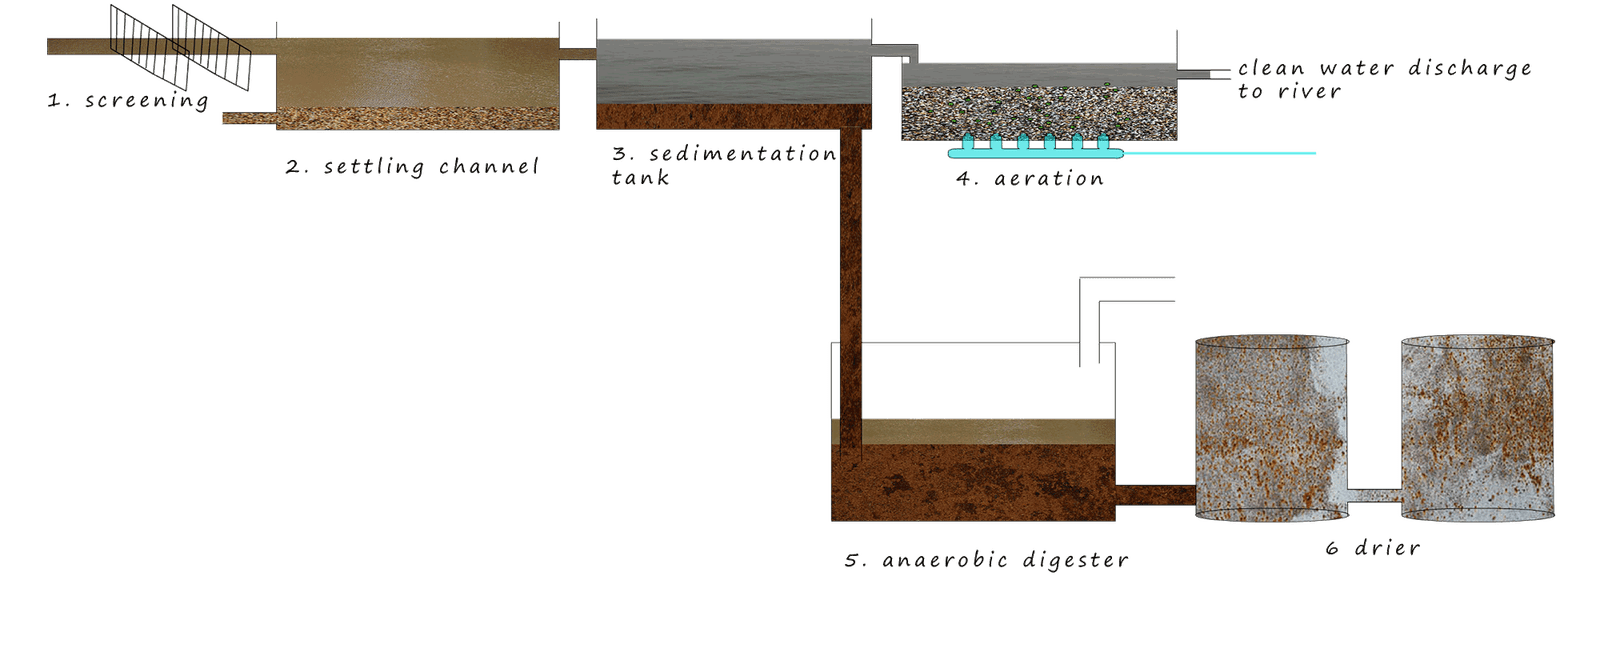 Waste water treatment flow chart.